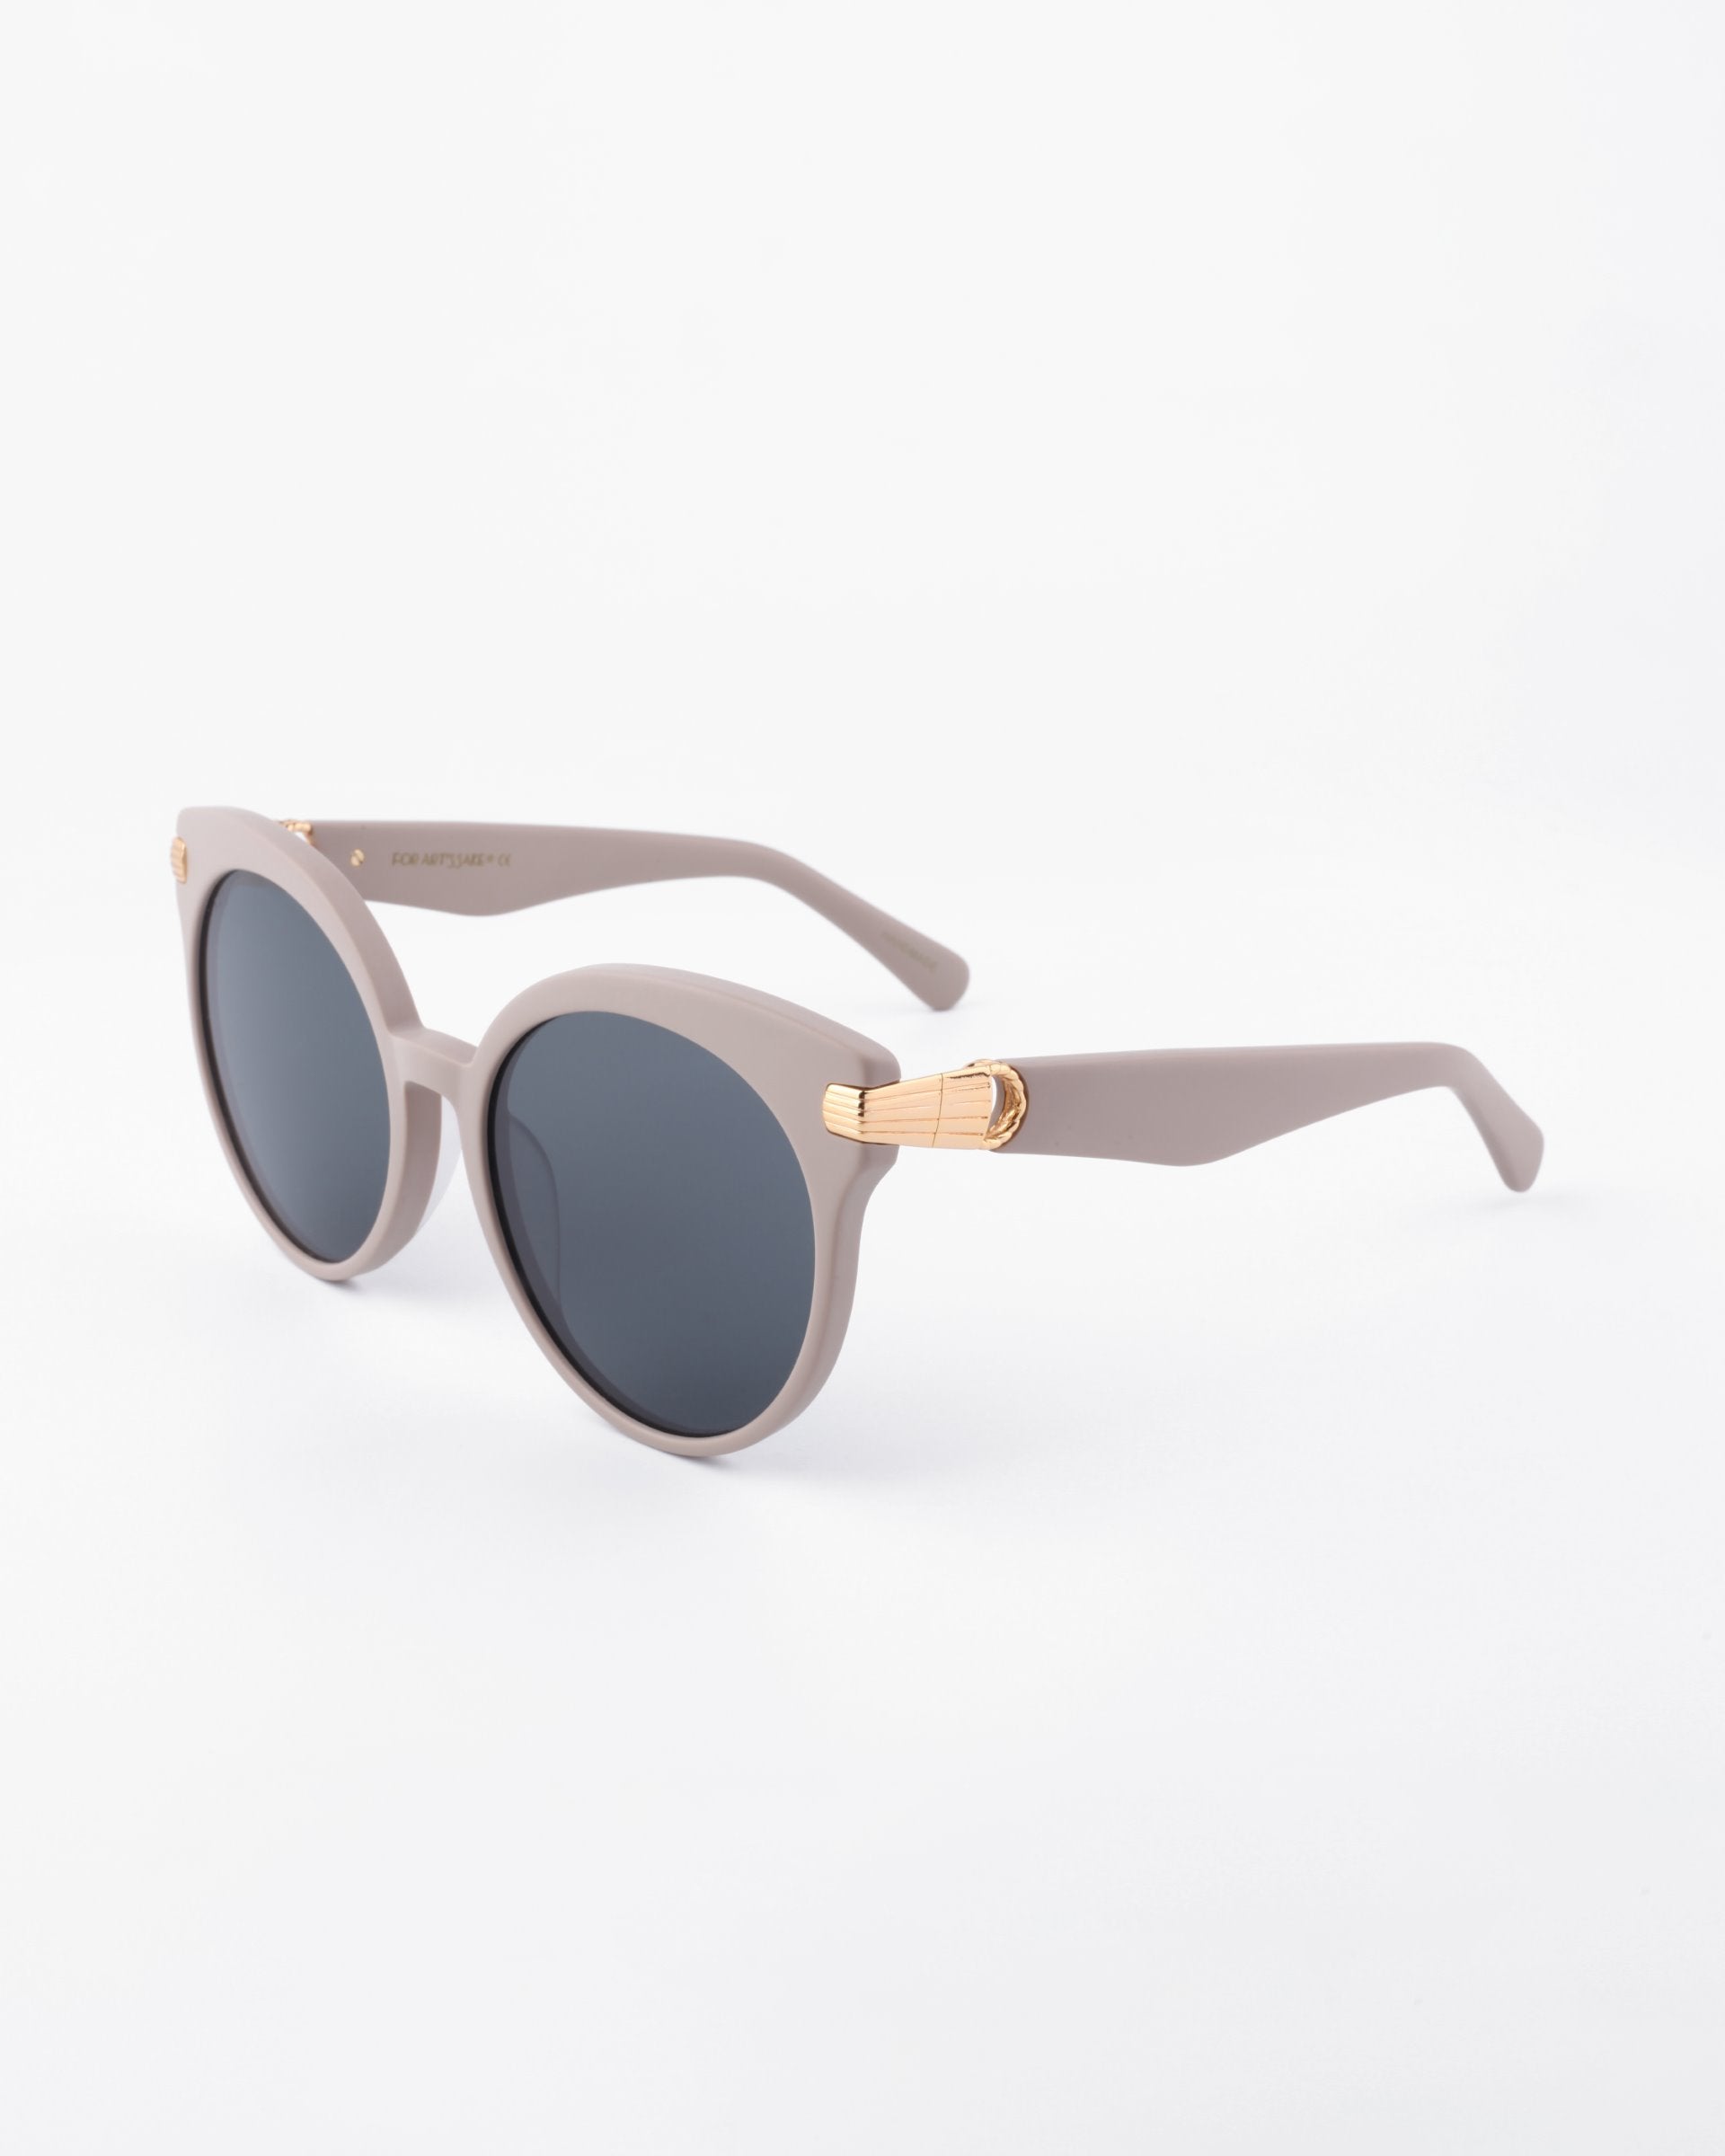 A pair of stylish round For Art&#39;s Sake® Muse sunglasses with light grey frames and shatter-resistant nylon lenses. The arms feature 18-karat gold-plated accents near the hinges. Handmade from plant-based acetate, these sunglasses are placed against a plain white background.